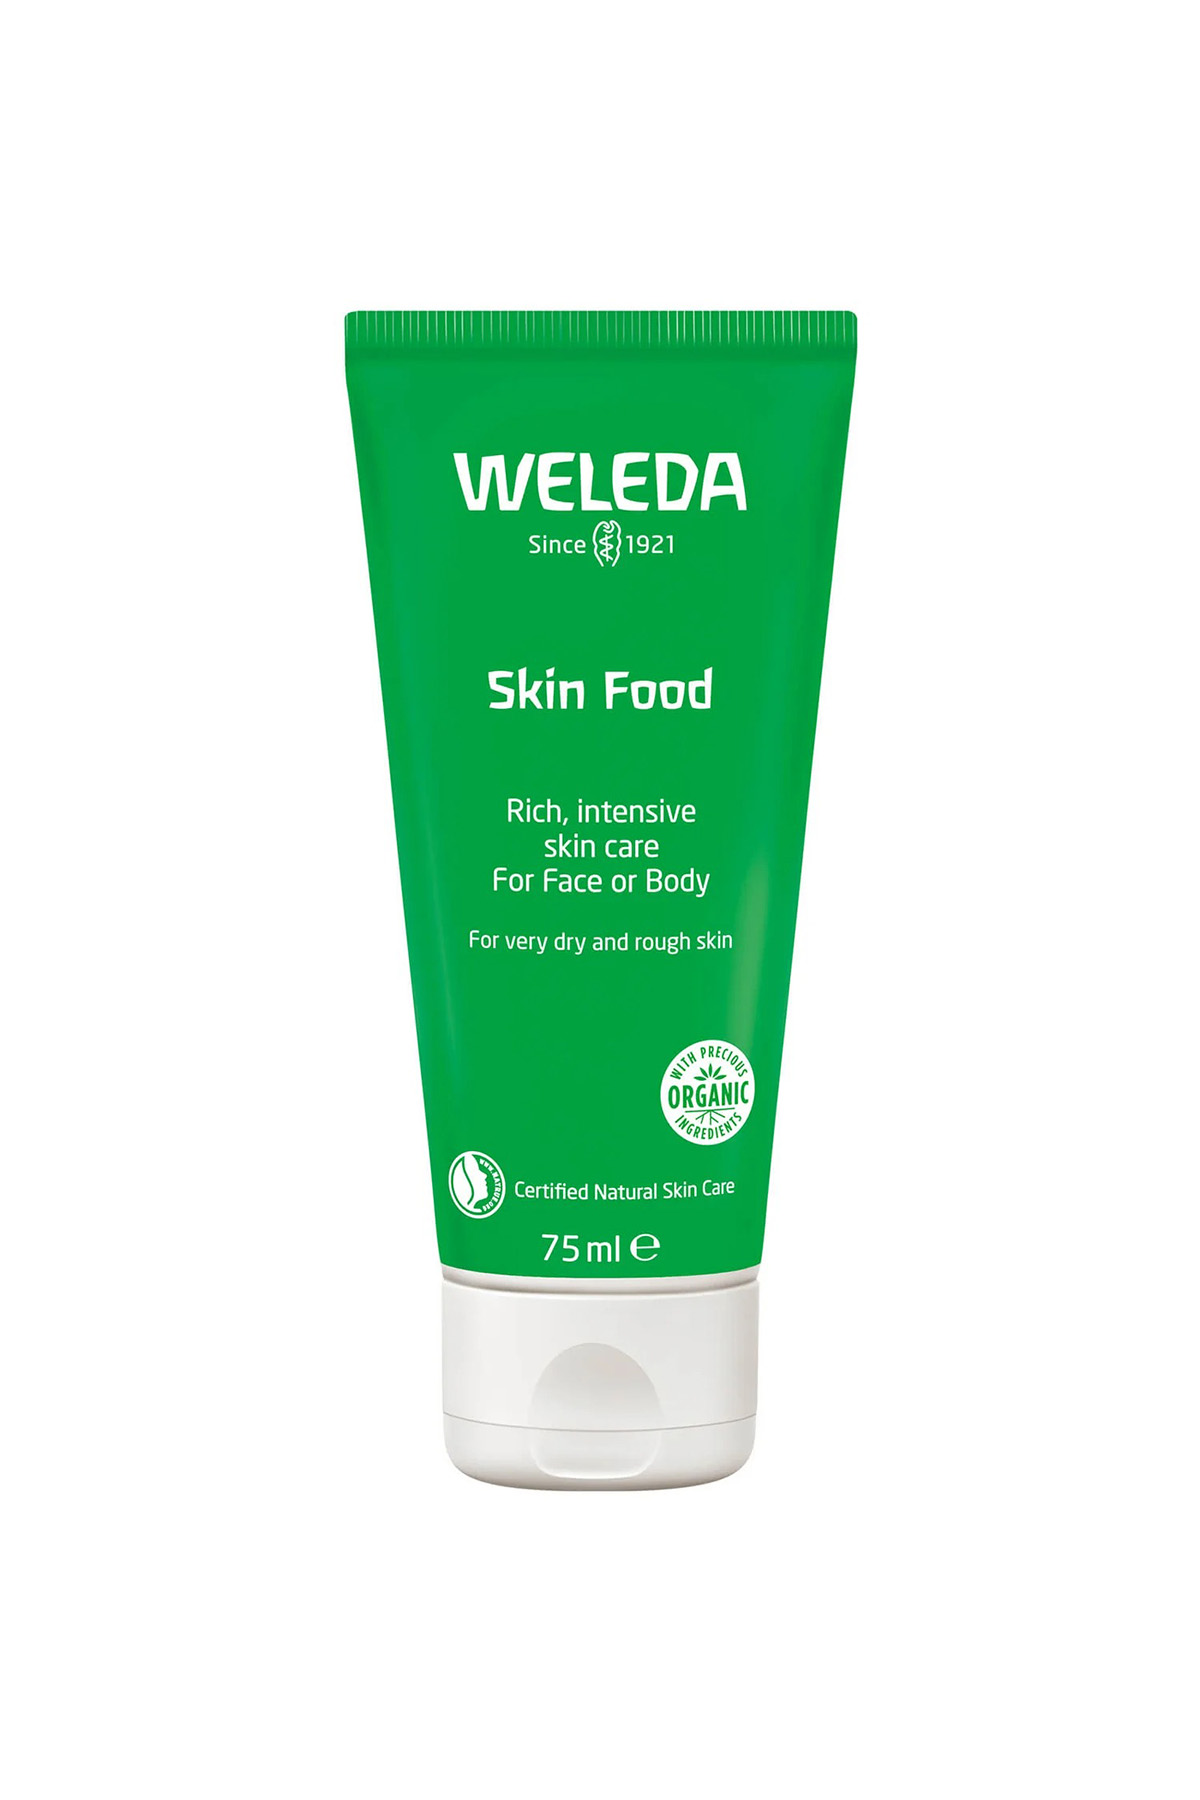 Weleda Skin Food Rich, Intensive Skin Care For Face or Body